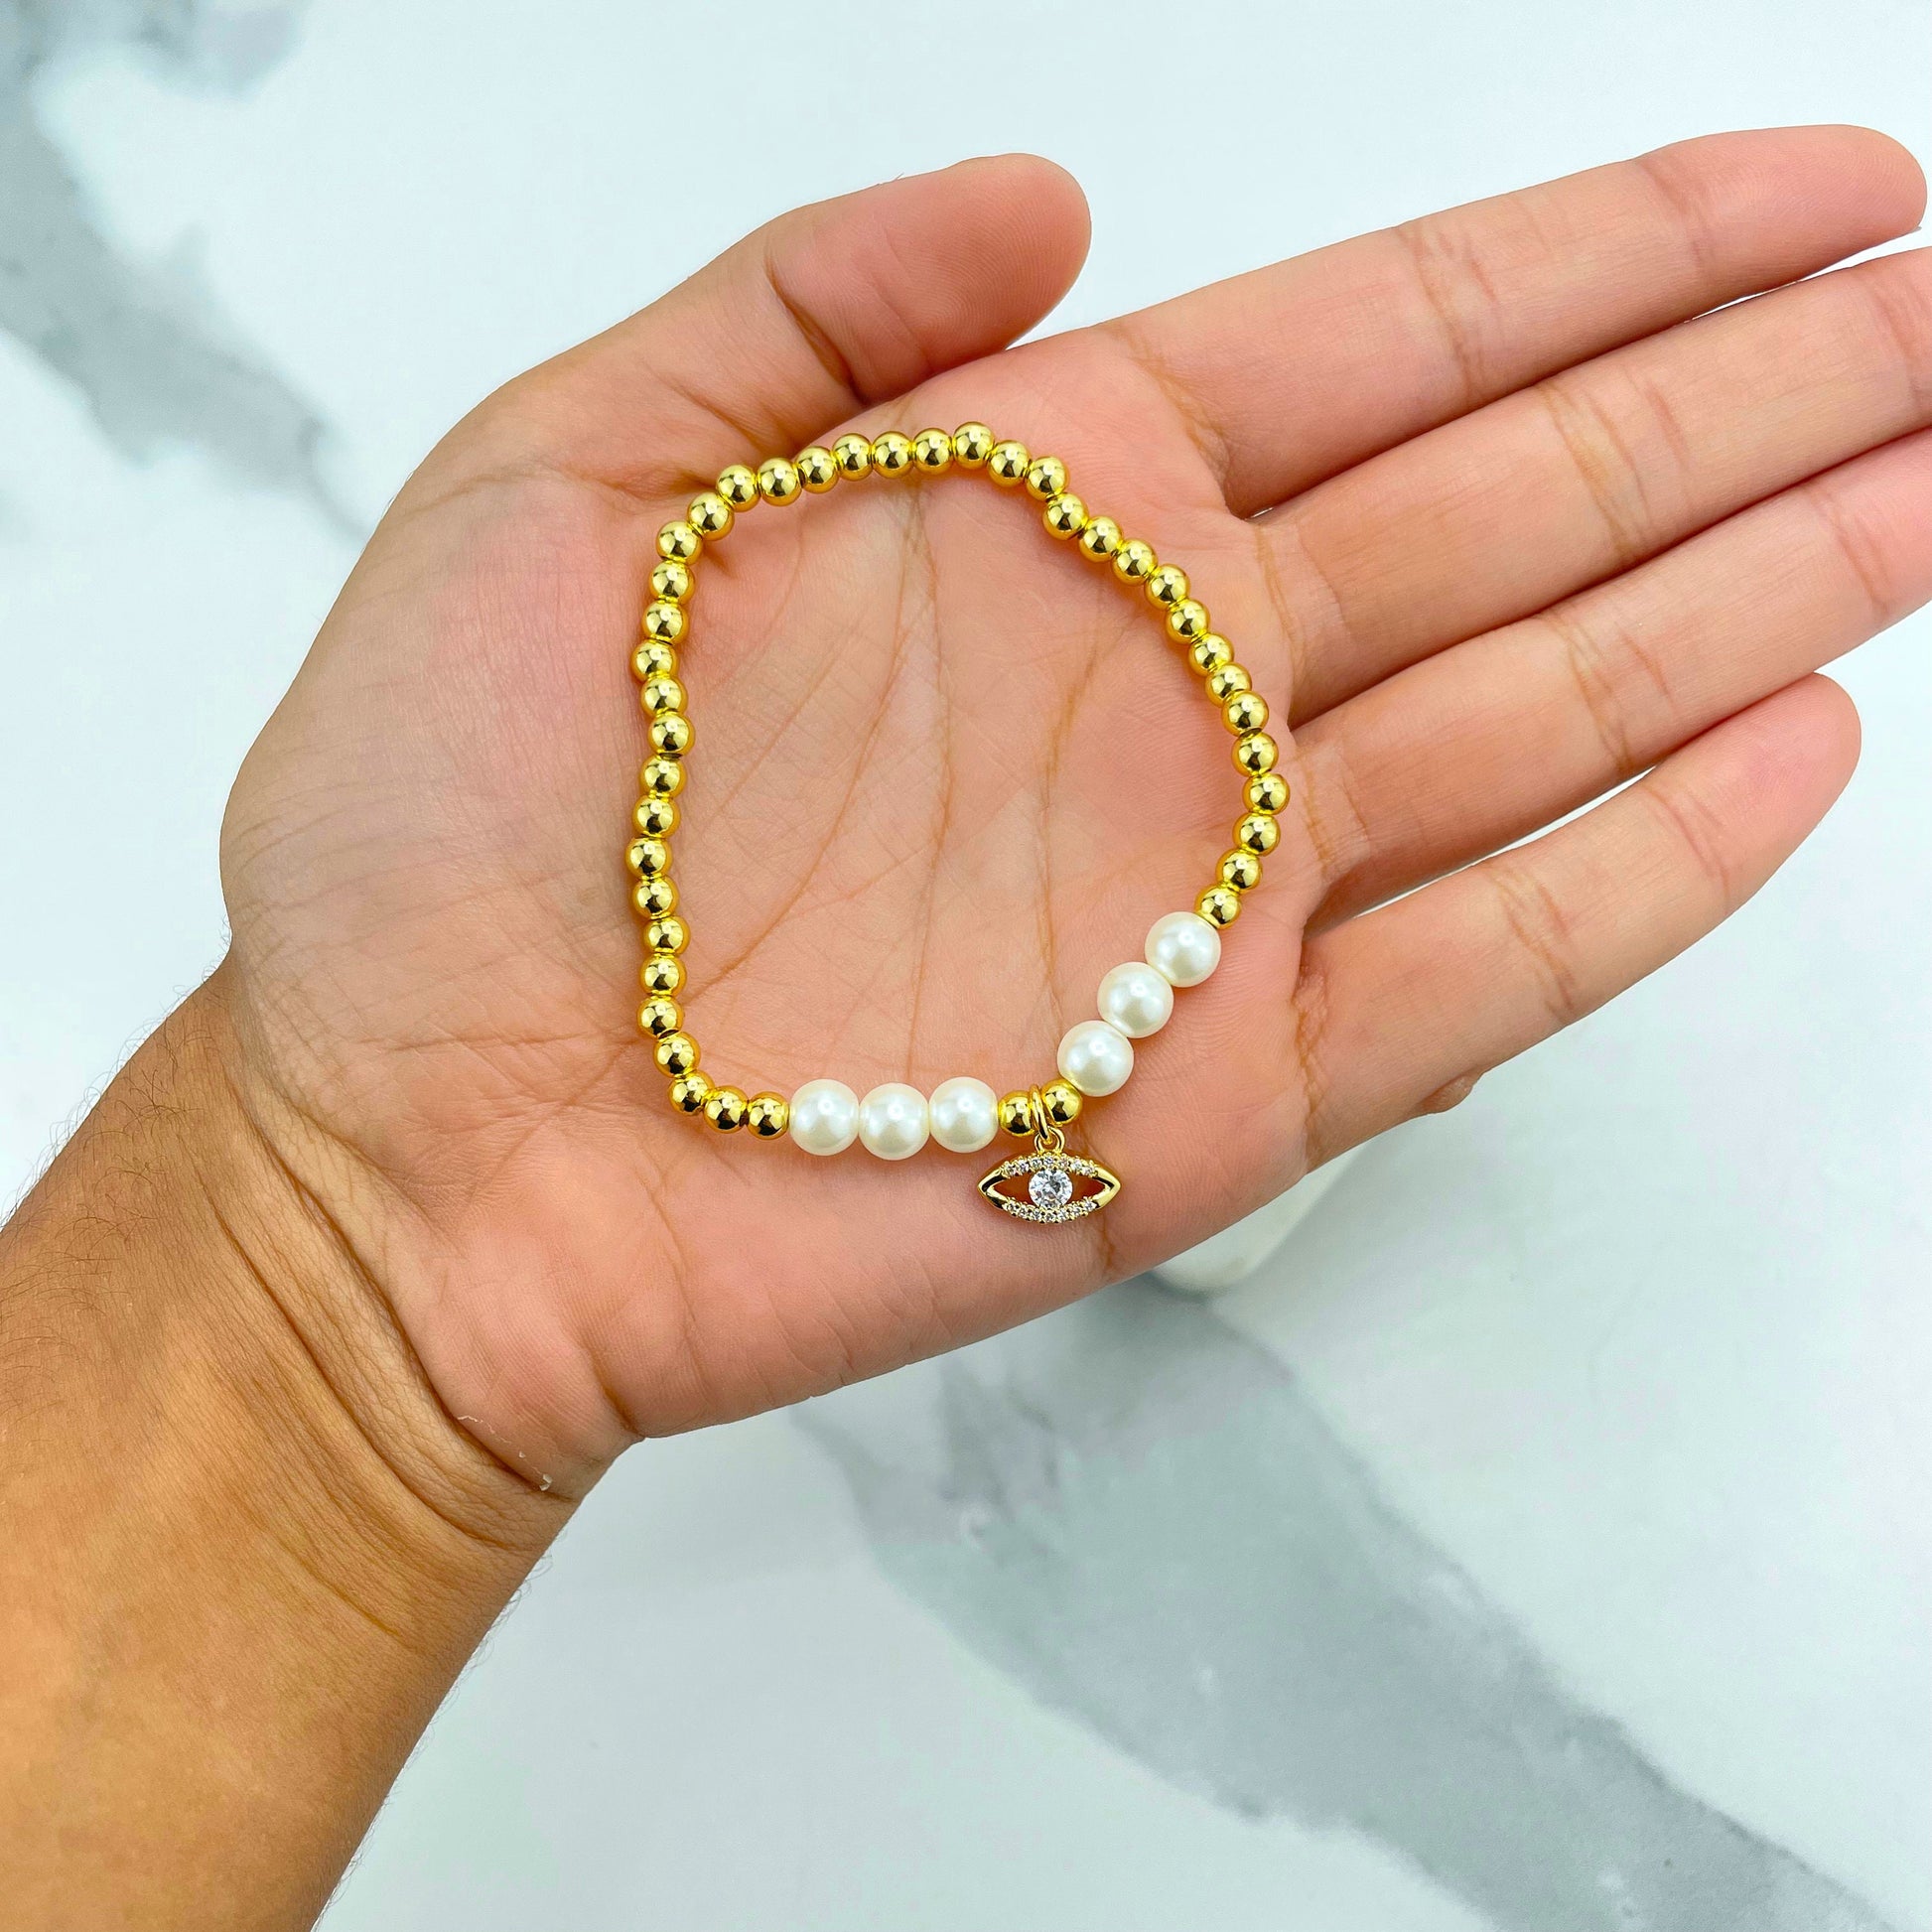 18k Gold Filled Simulated Pearl and Gold Beads with "Fé" (Faith in Portuguese) Charms Bracelet, Wholesale Jewelry Making Supplies